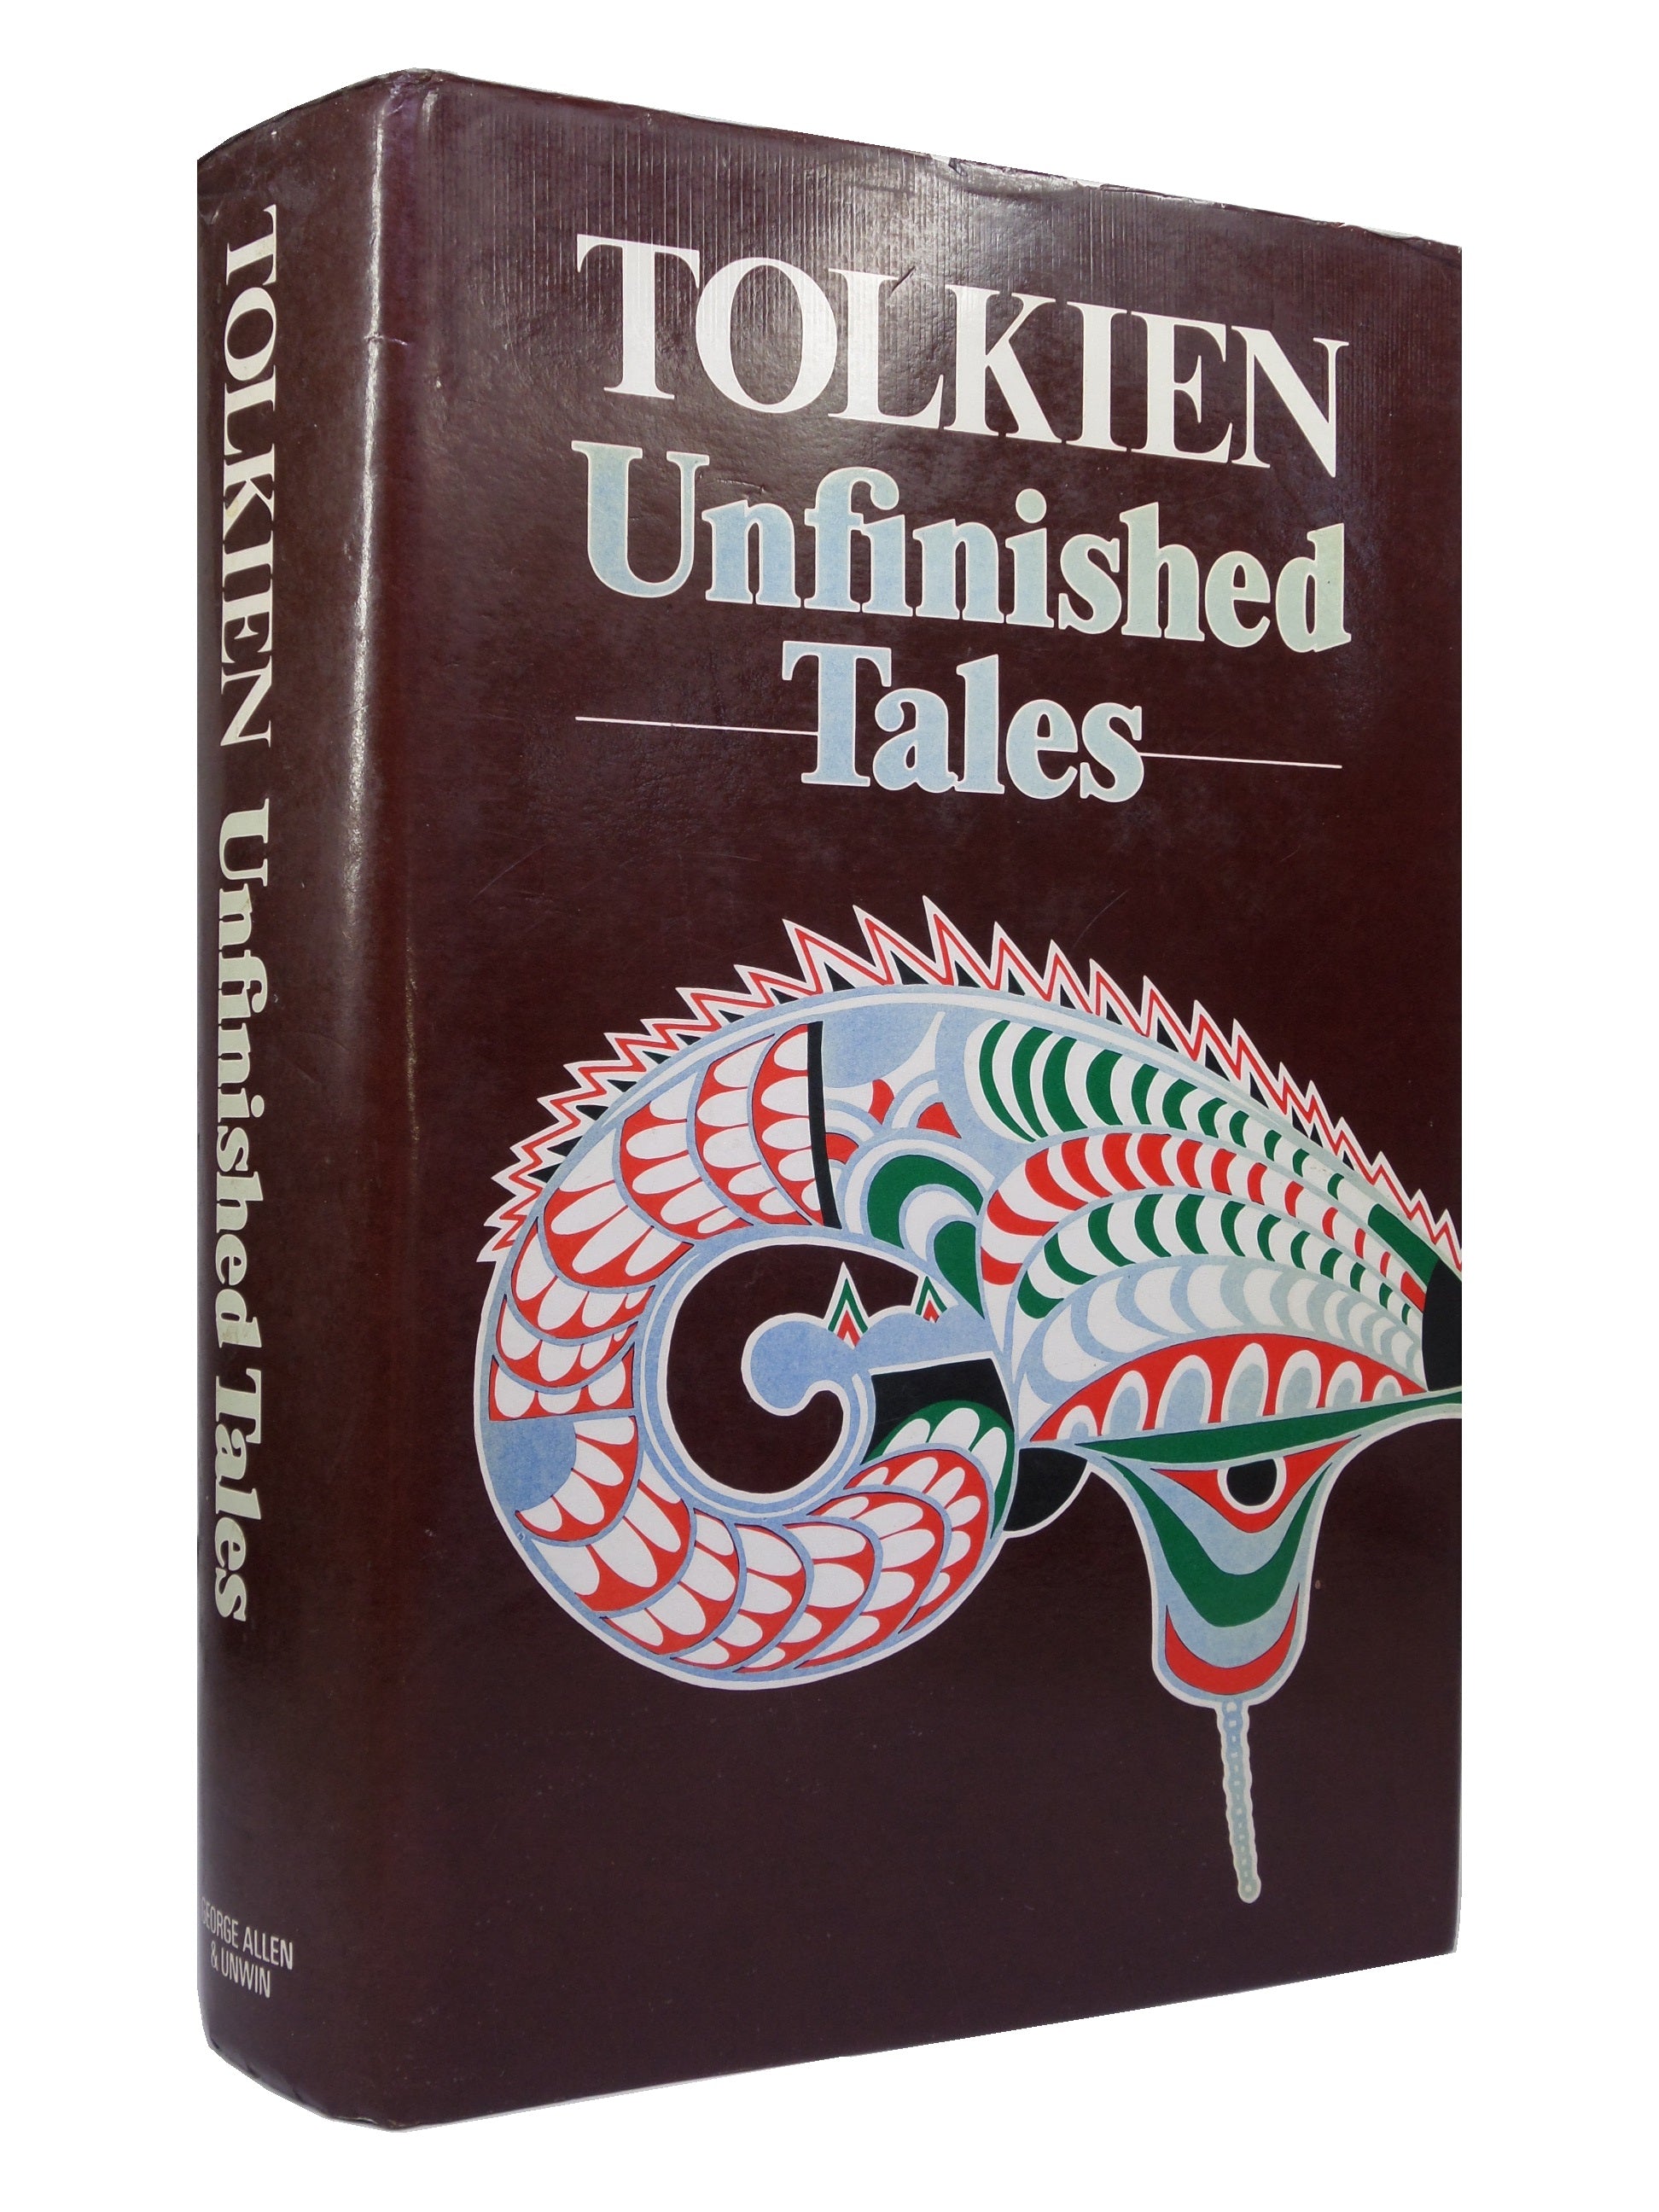 UNFINISHED TALES BY J.R.R. TOLKIEN 1980 FIRST EDITION